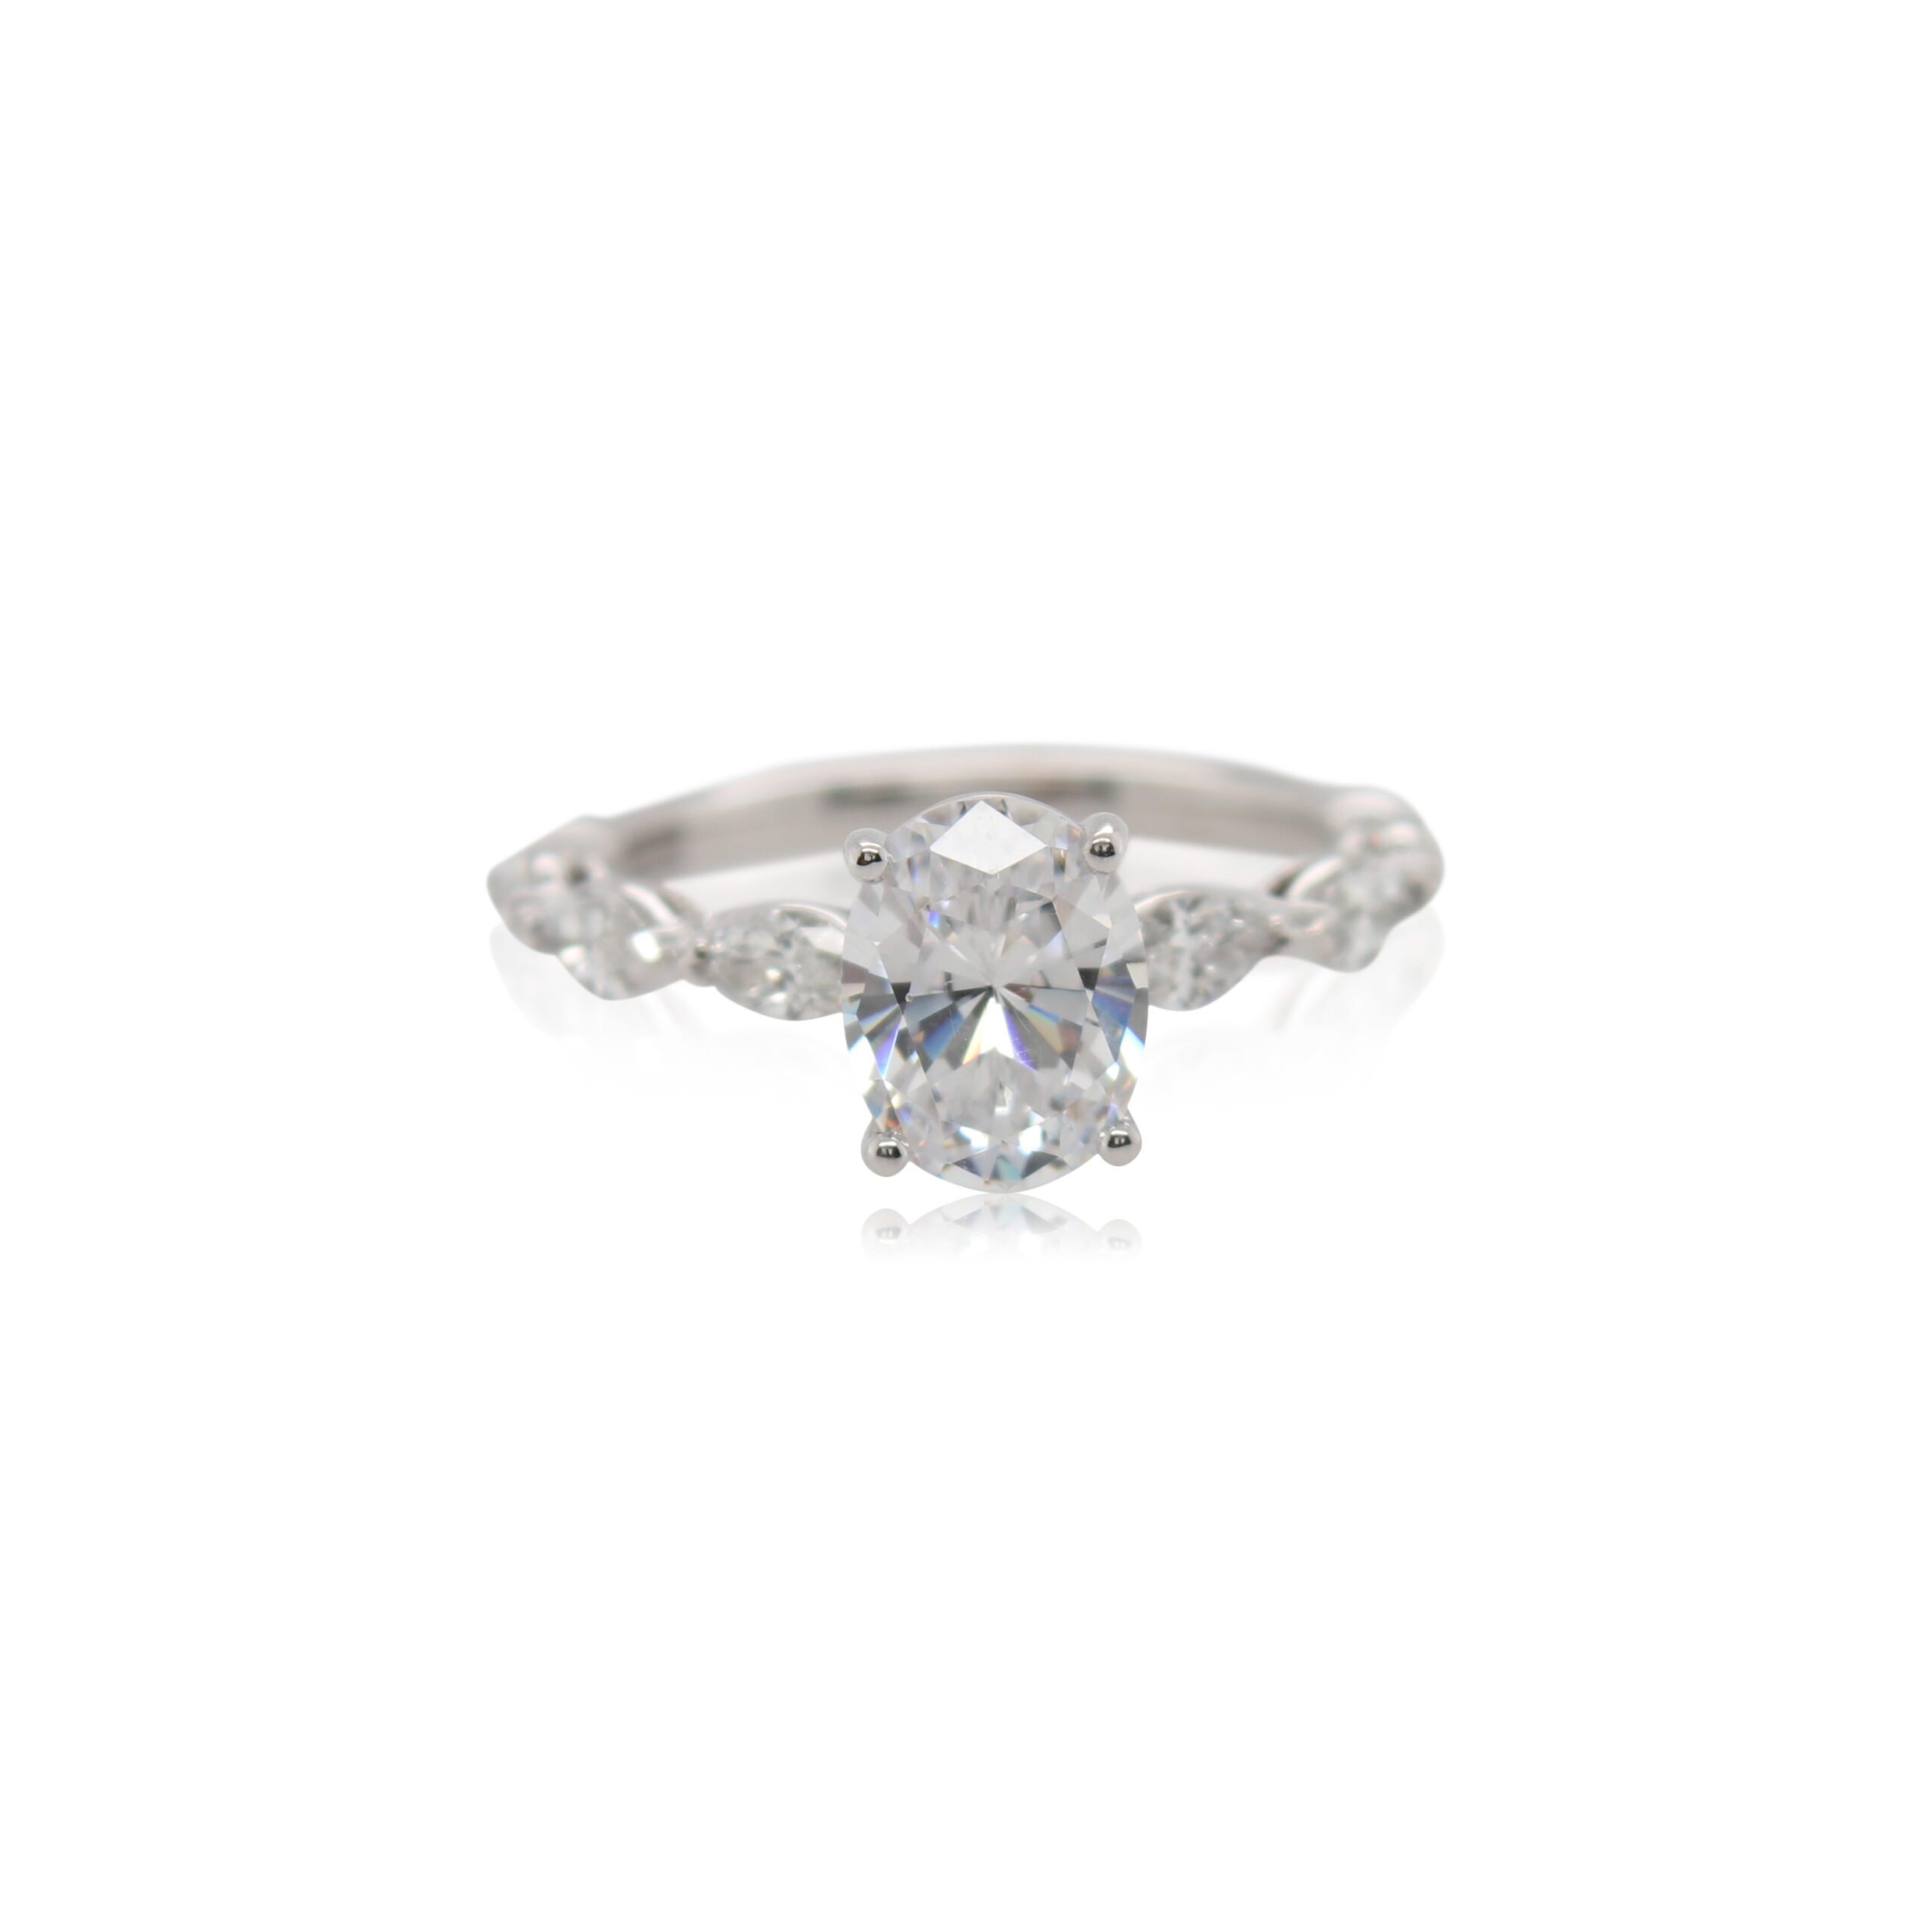 A 394028Oval Diamond Engagement Ring